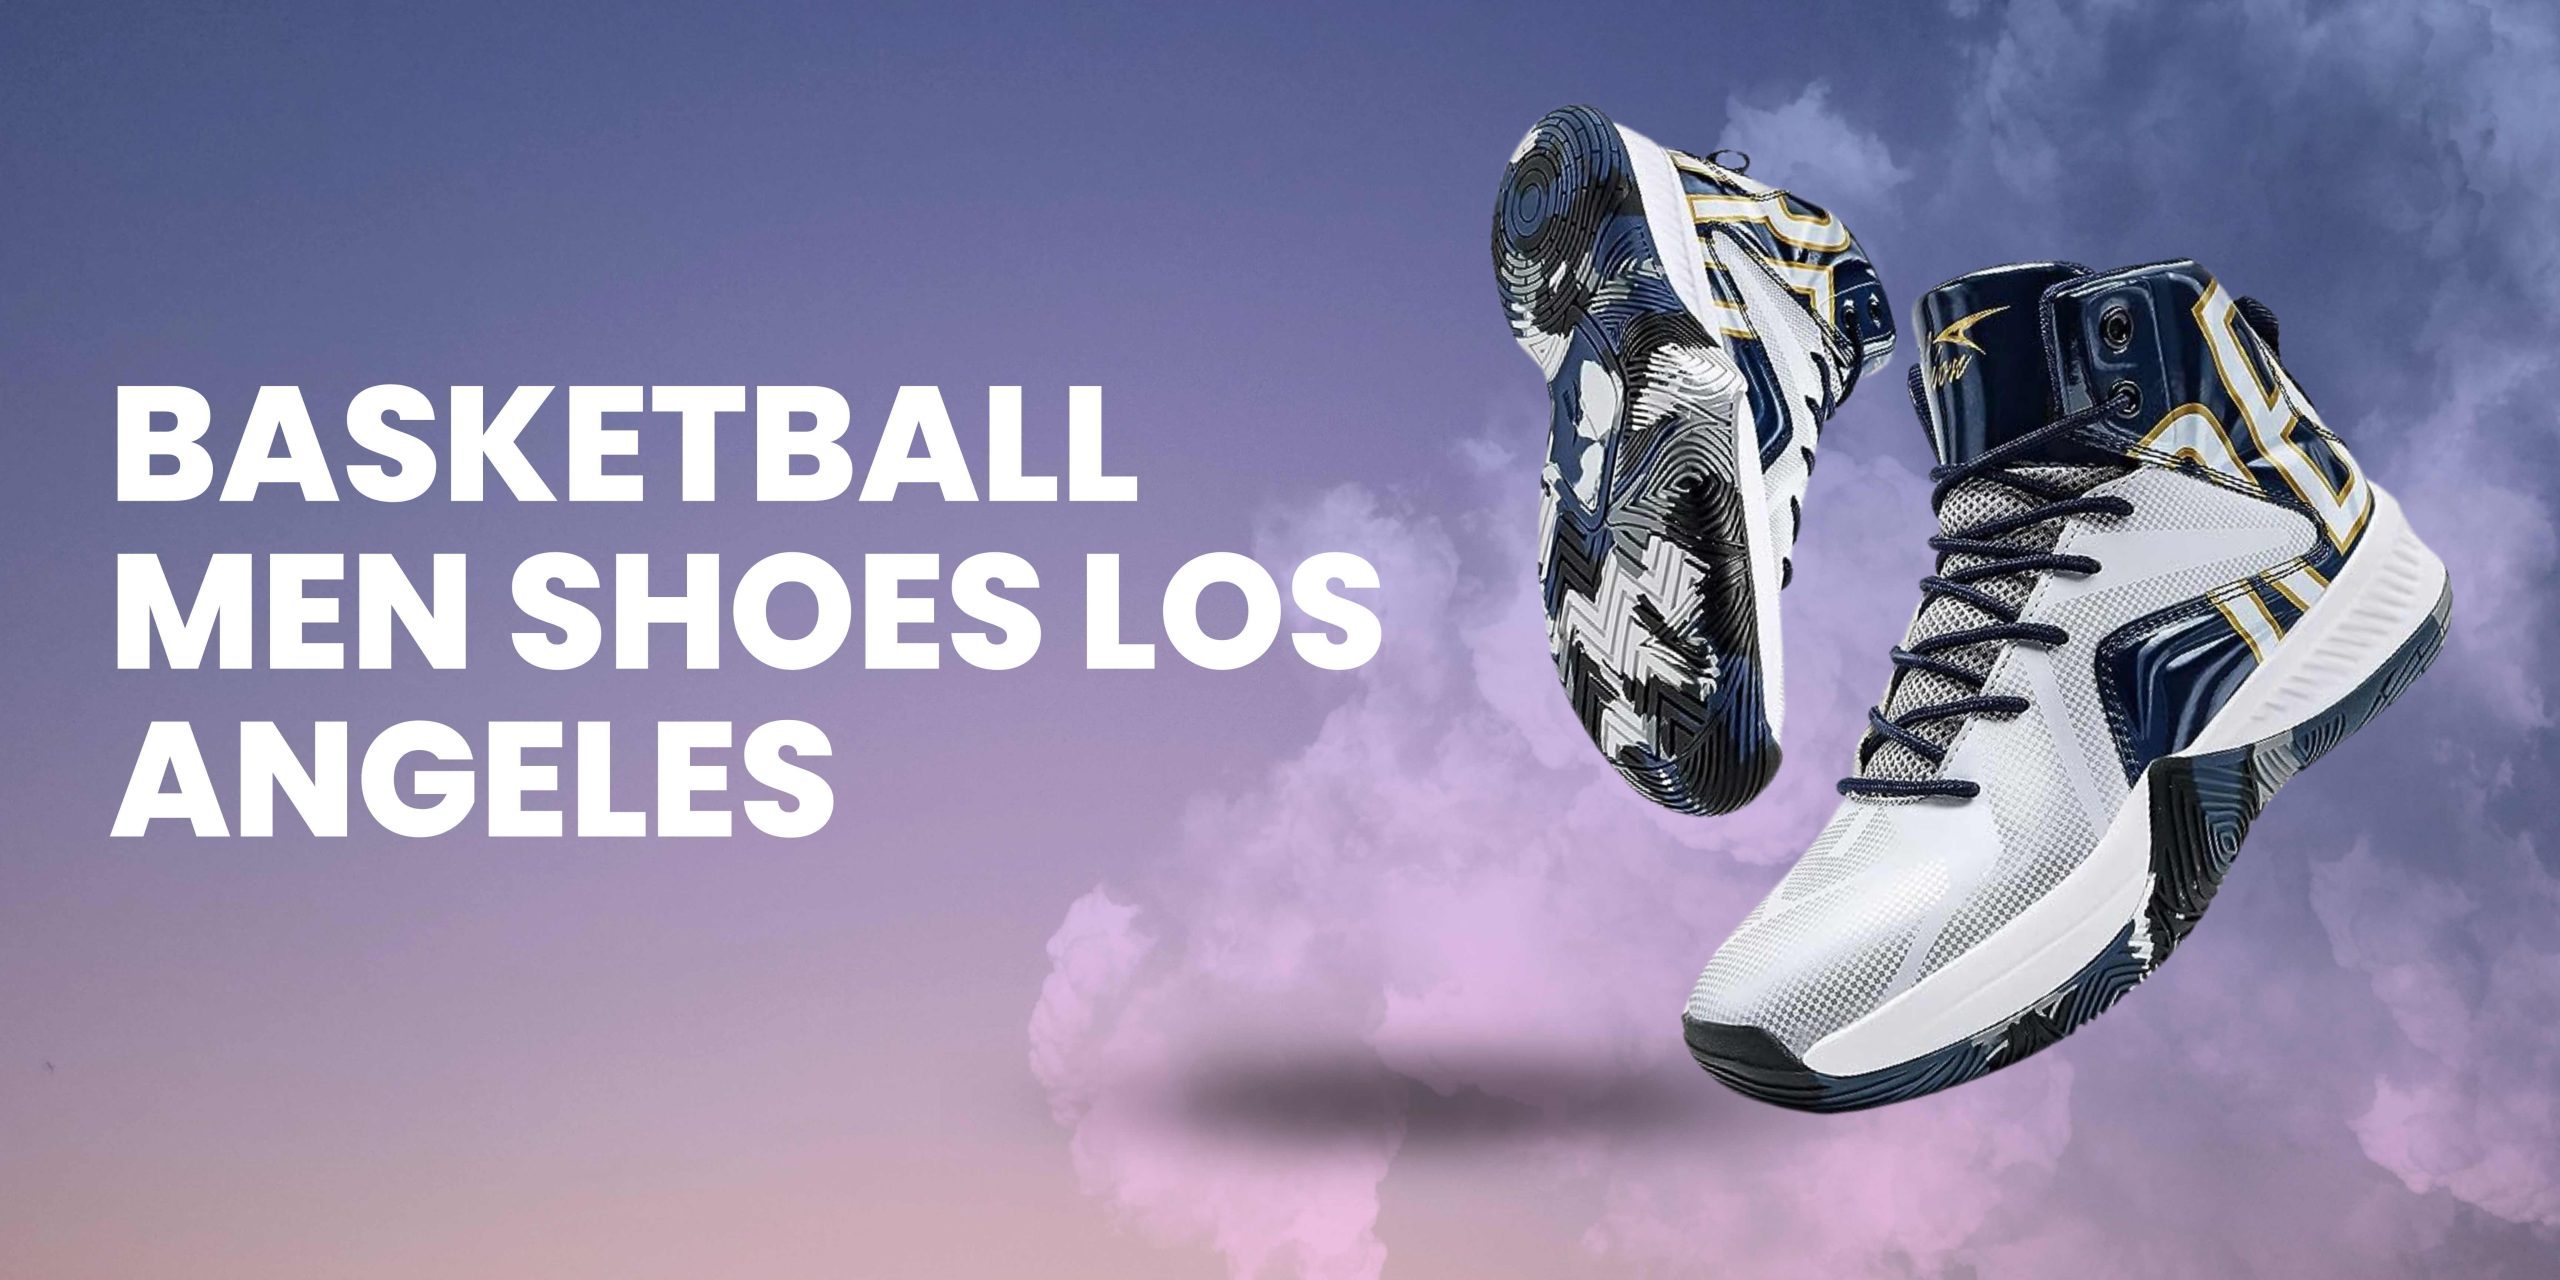 Basketball Men Shoes Los Angeles: Step Up Your Game in Style